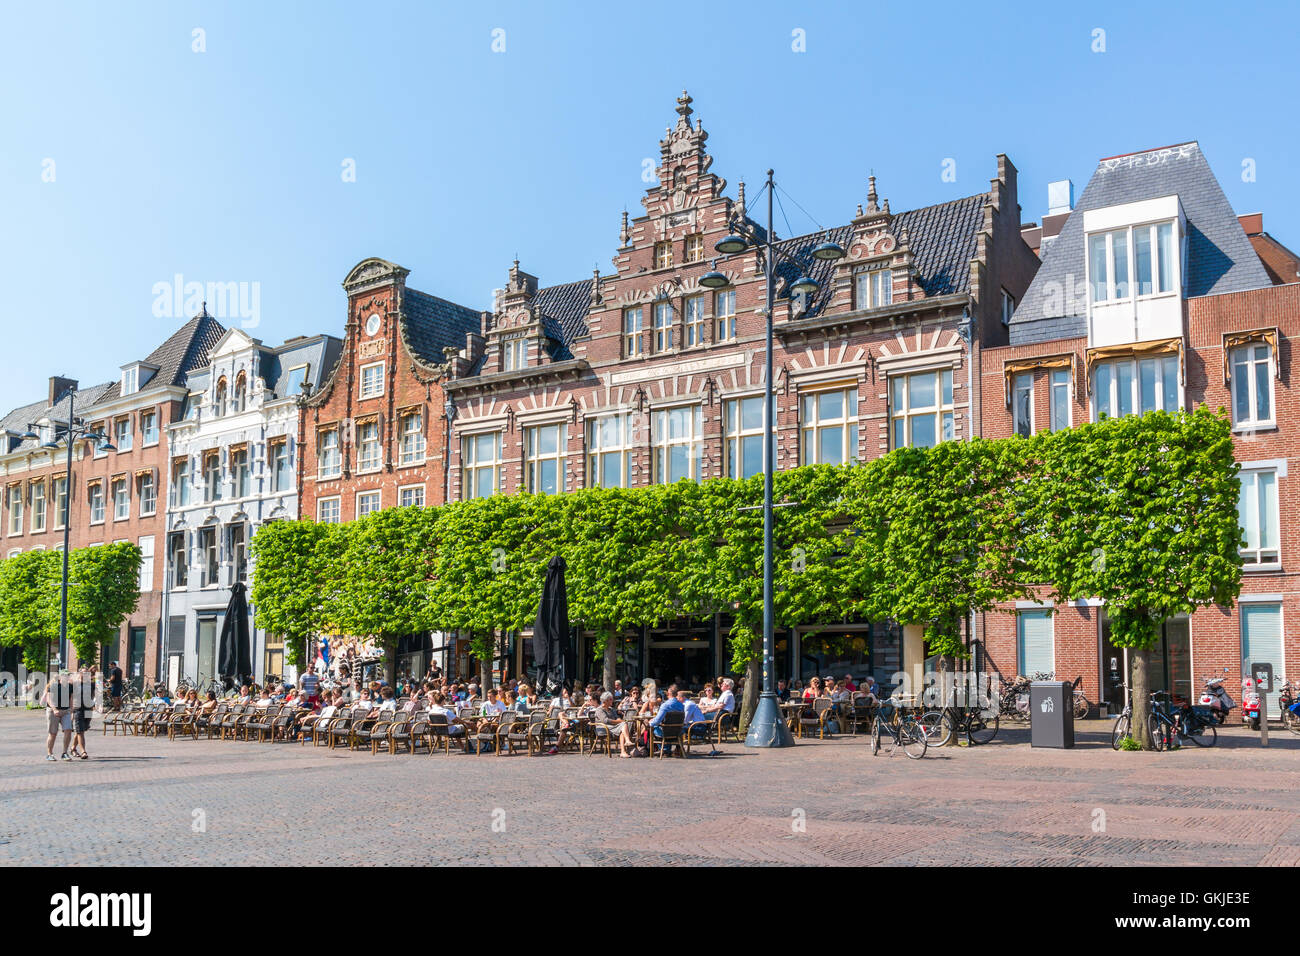 People relaxing on sidewalk cafe on Grote Markt market square in city centre of Haarlem, Holland, Netherlands Stock Photo